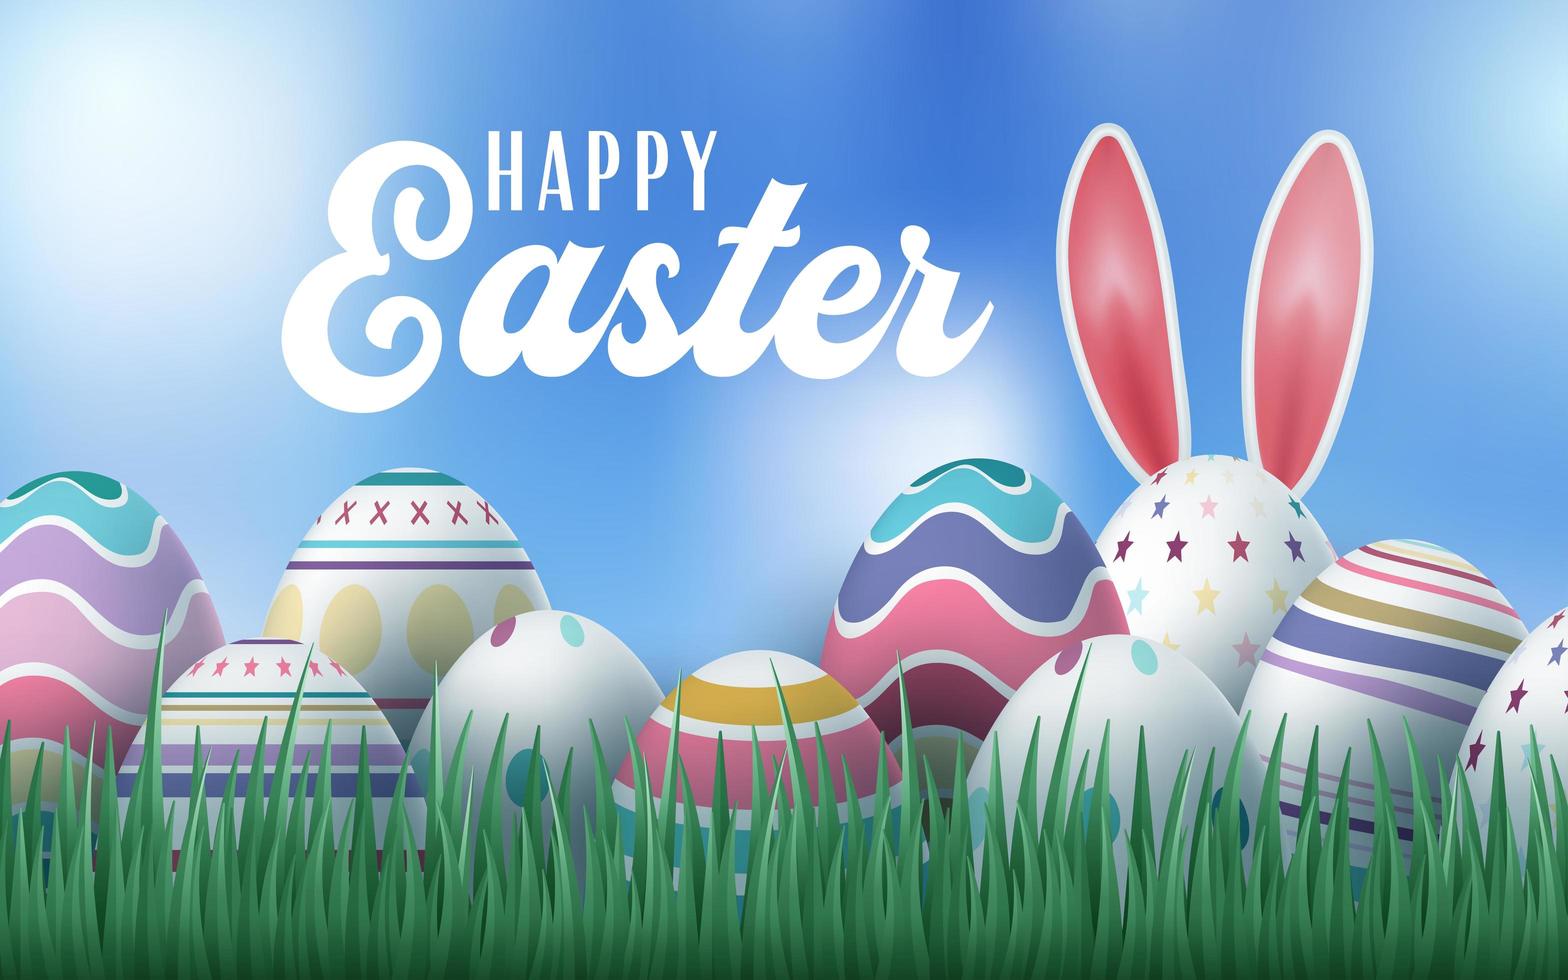 Easter Eggs with Bunny Ears Easter Card Design  vector